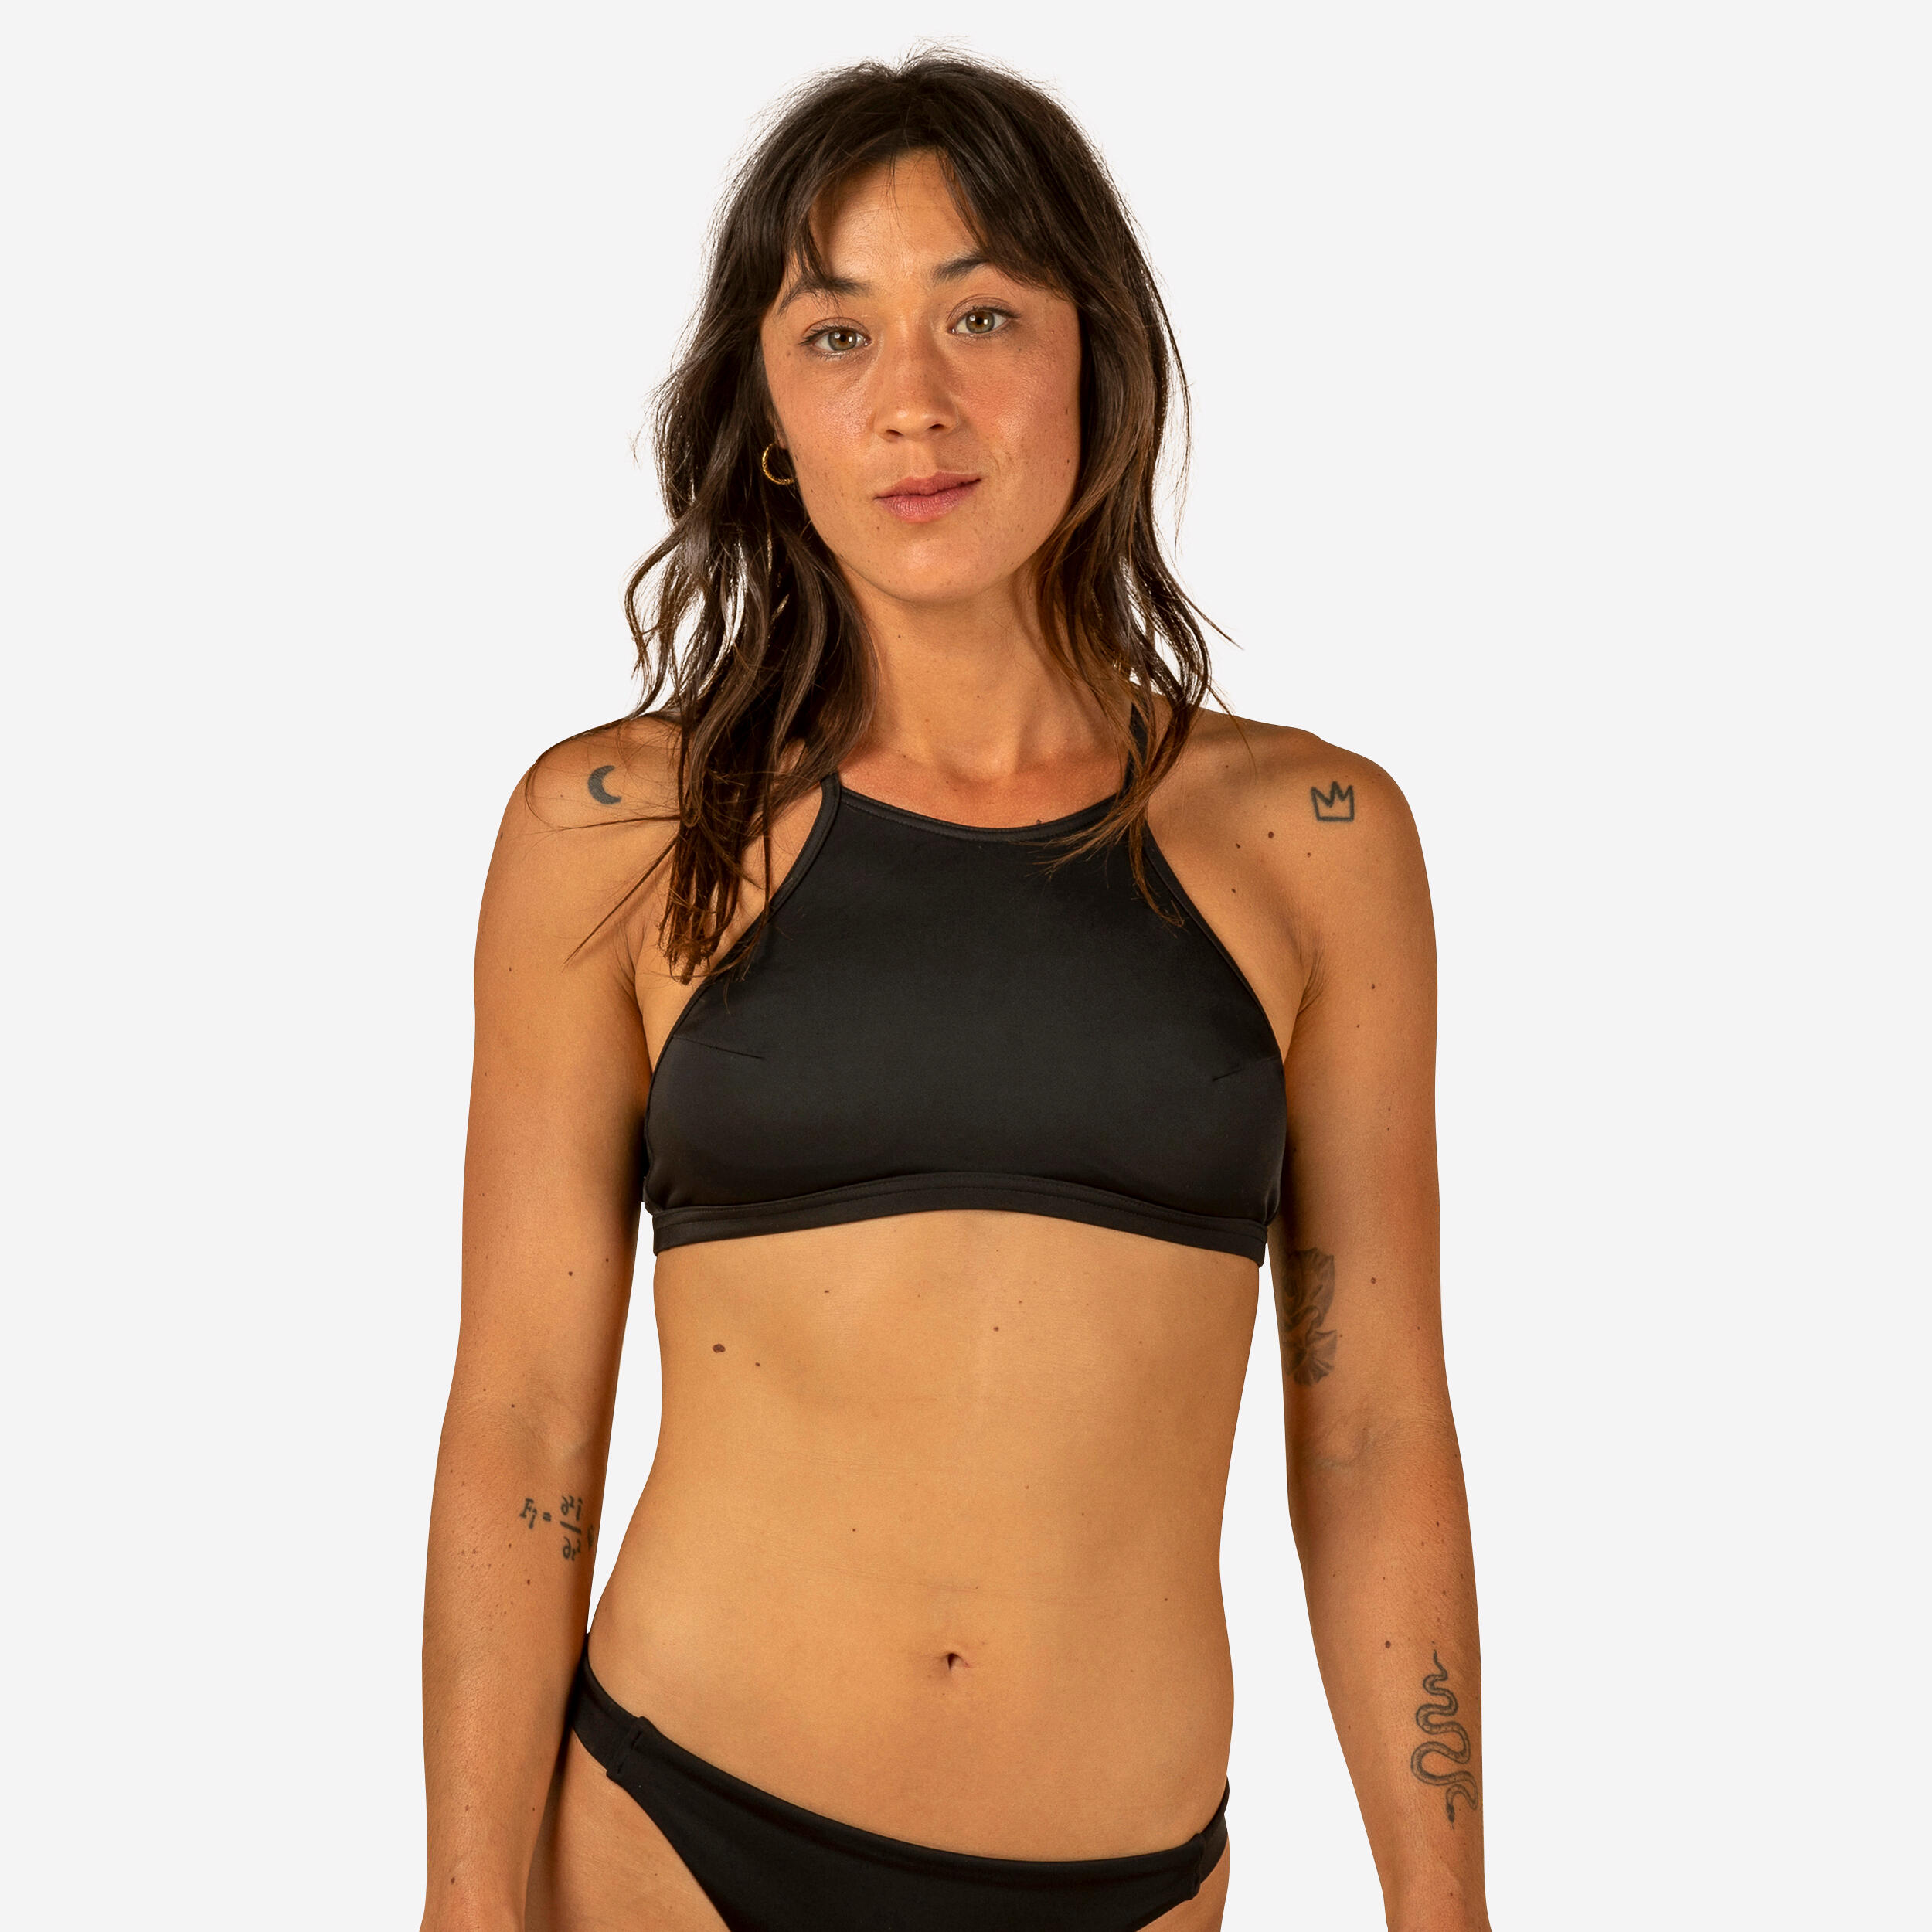 OLAIAN WOMEN'S SURFING SWIMSUIT BIKINI TOP WITH PADDED CUPS ANDREA - BLACK